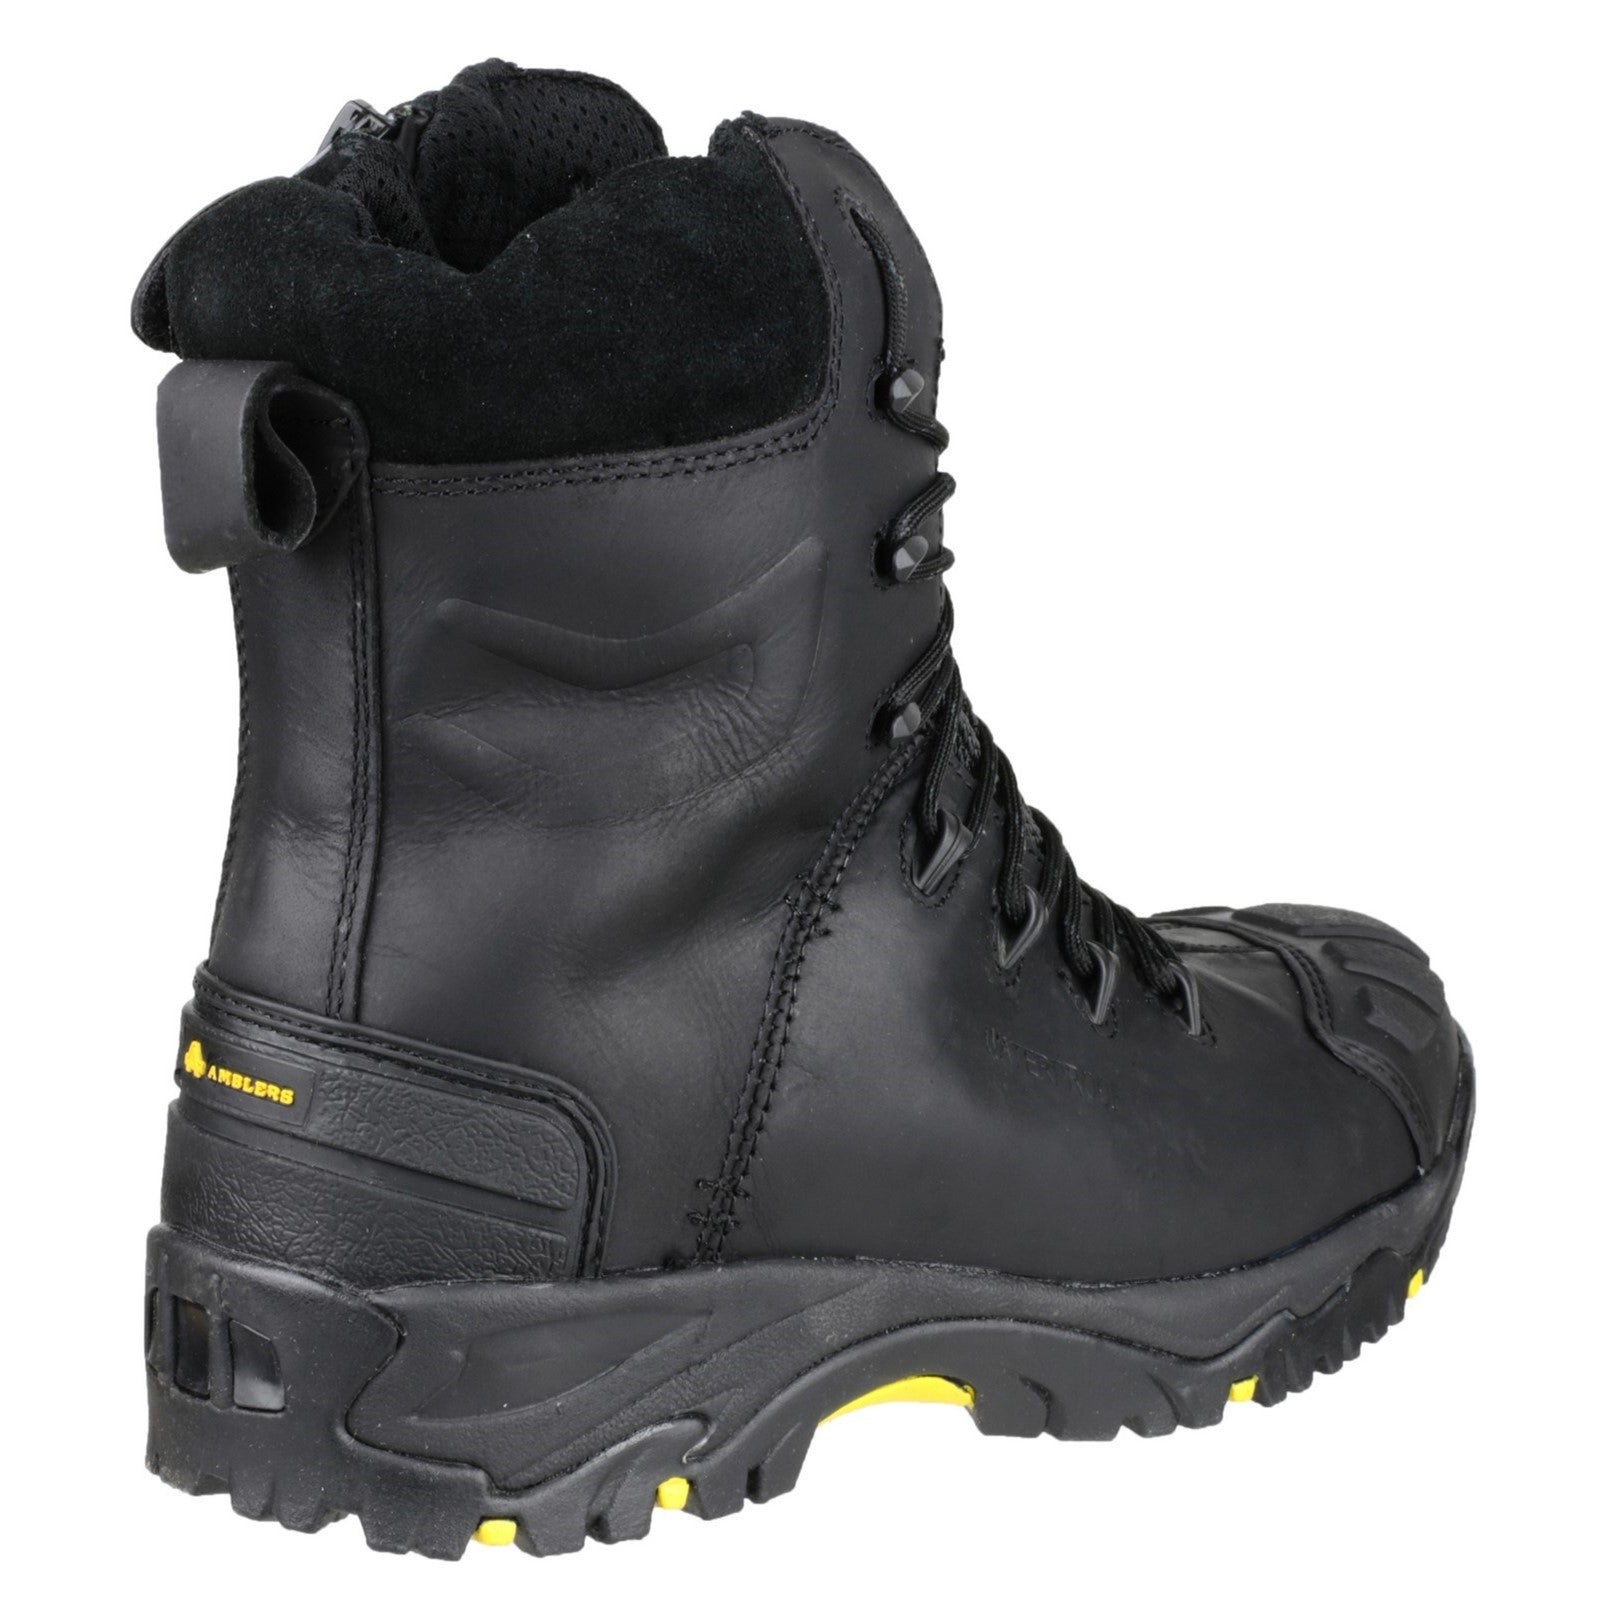 Amblers FS999 Hi Leg Composite Safety Boot With Side Zip